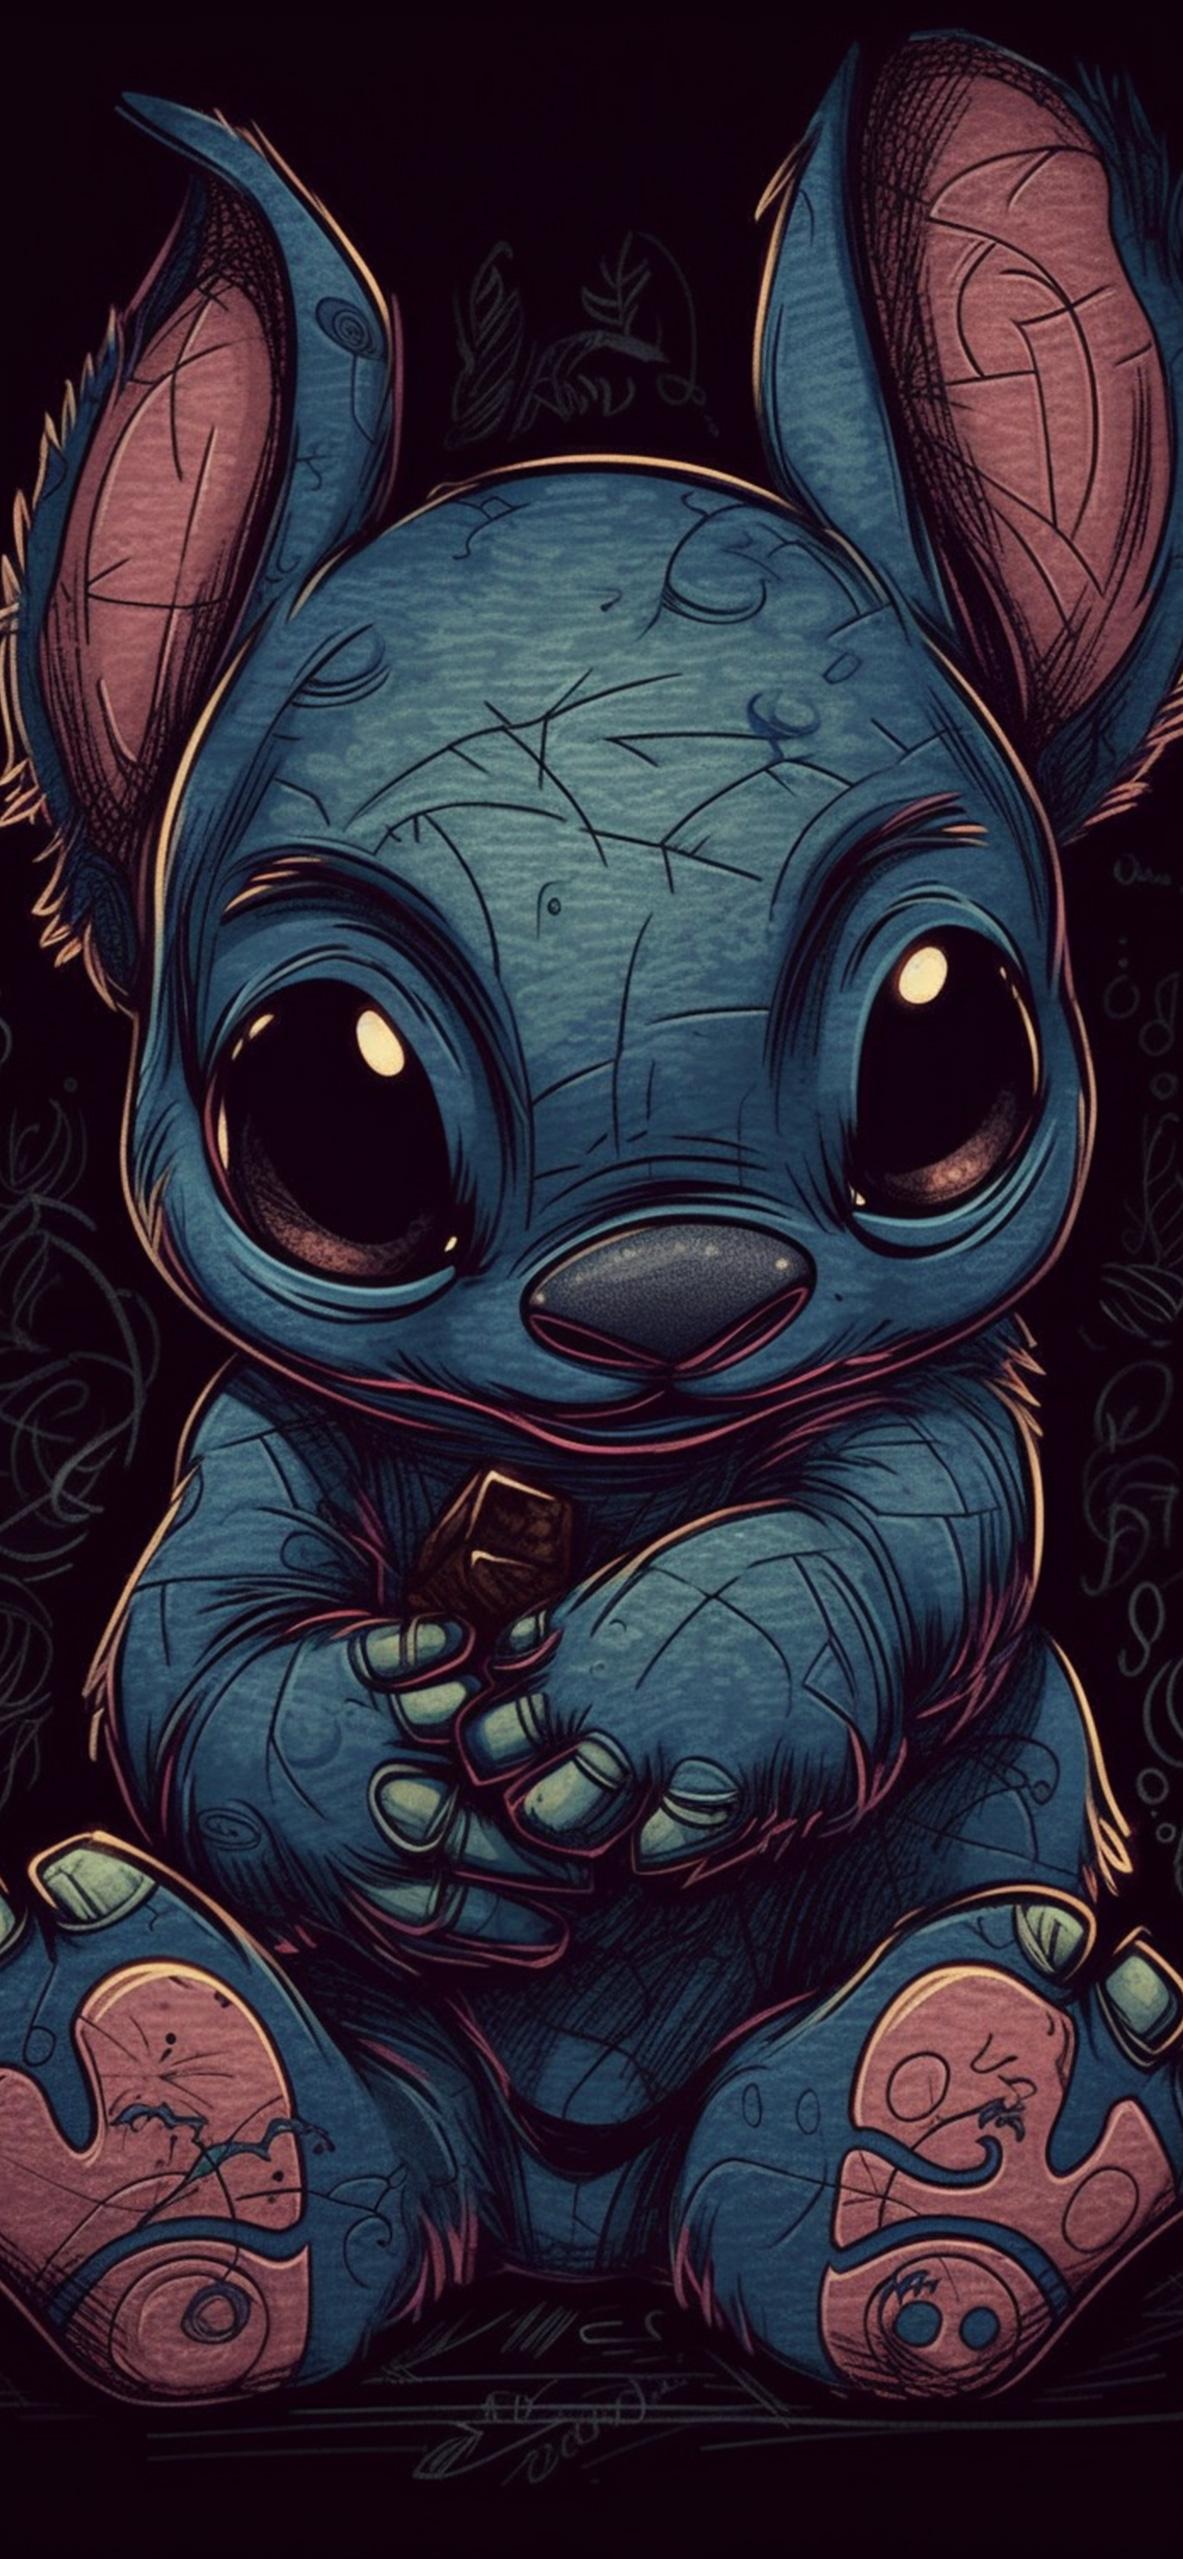 Stitch Dark Aesthetic Wallpaper Cool For iPhone